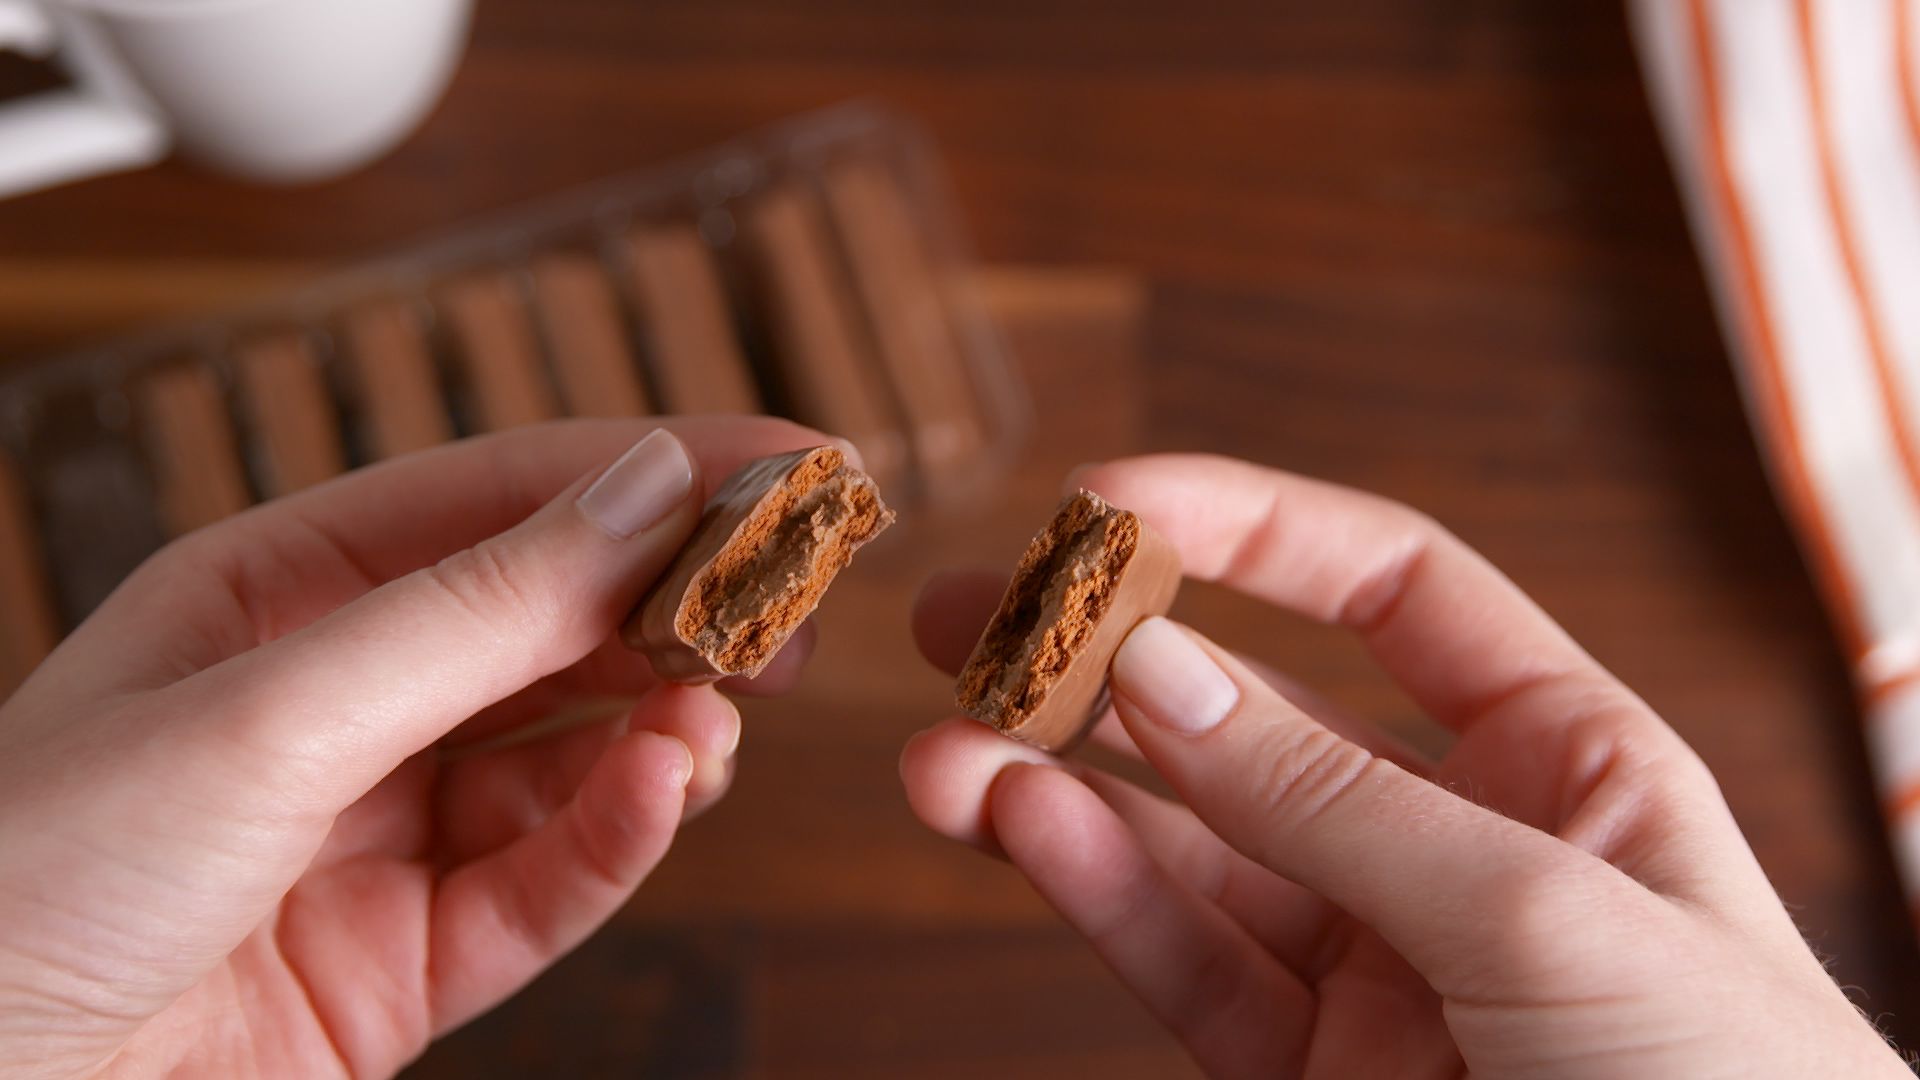 Tim Tam Cookies Arnotts | Tim Tams Chocolate Biscuits | Made in Australia |  Choose Your Flavor (2 Pack) (Double Coat)